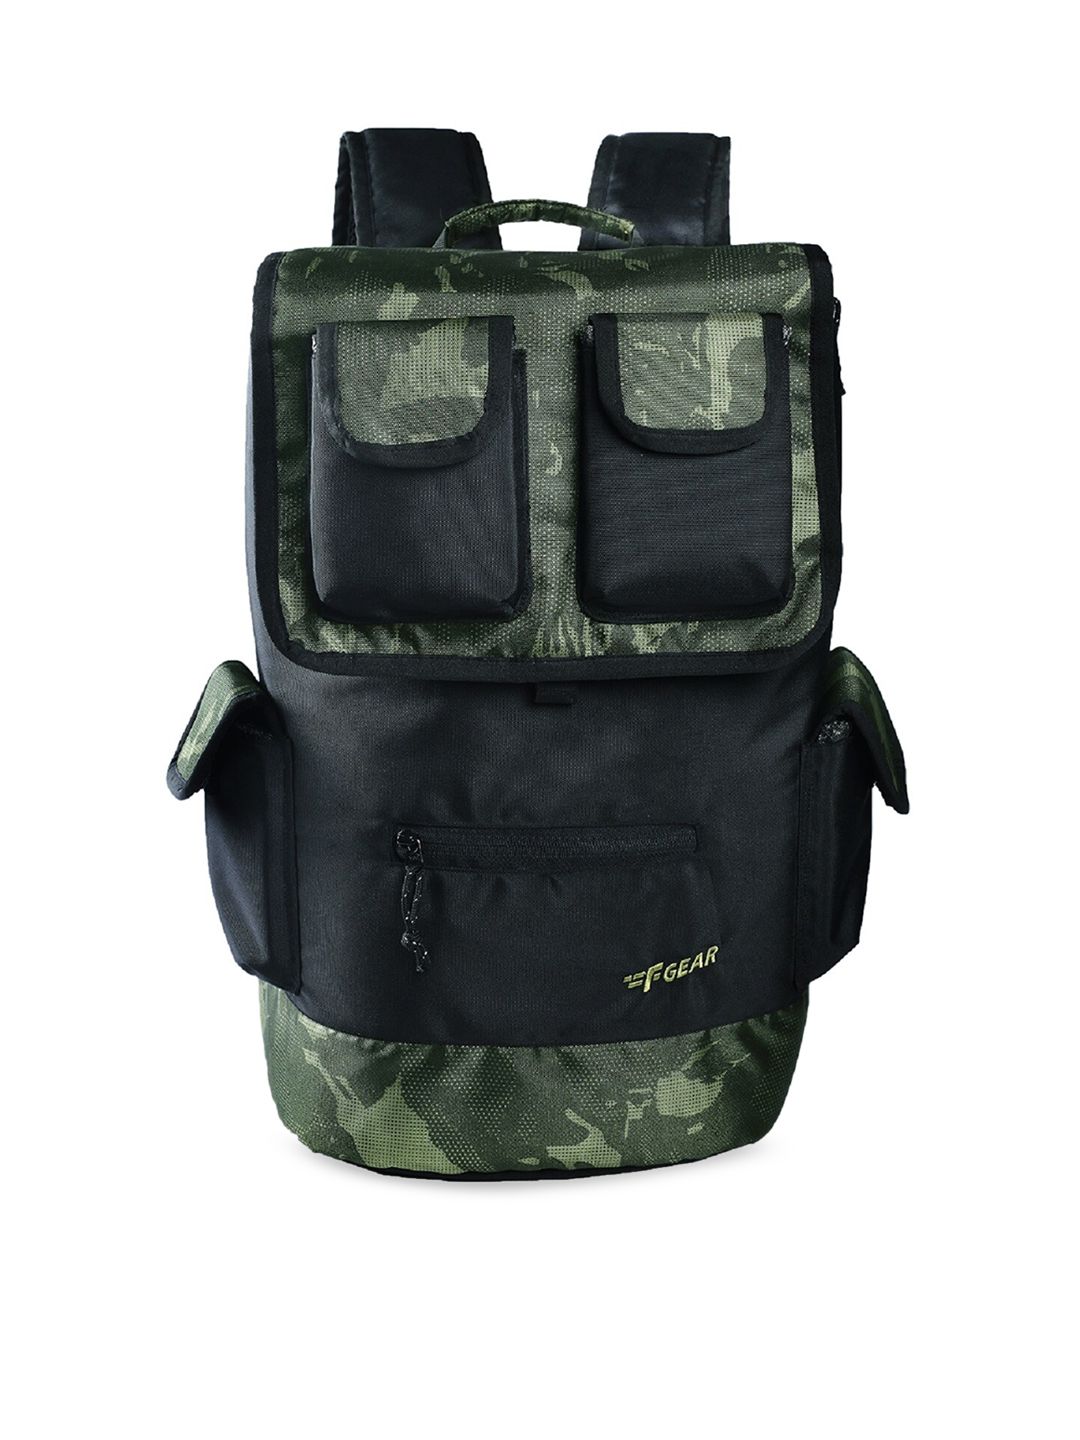 F Gear Unisex Olive Green & Black Camouflage Backpack Price in India